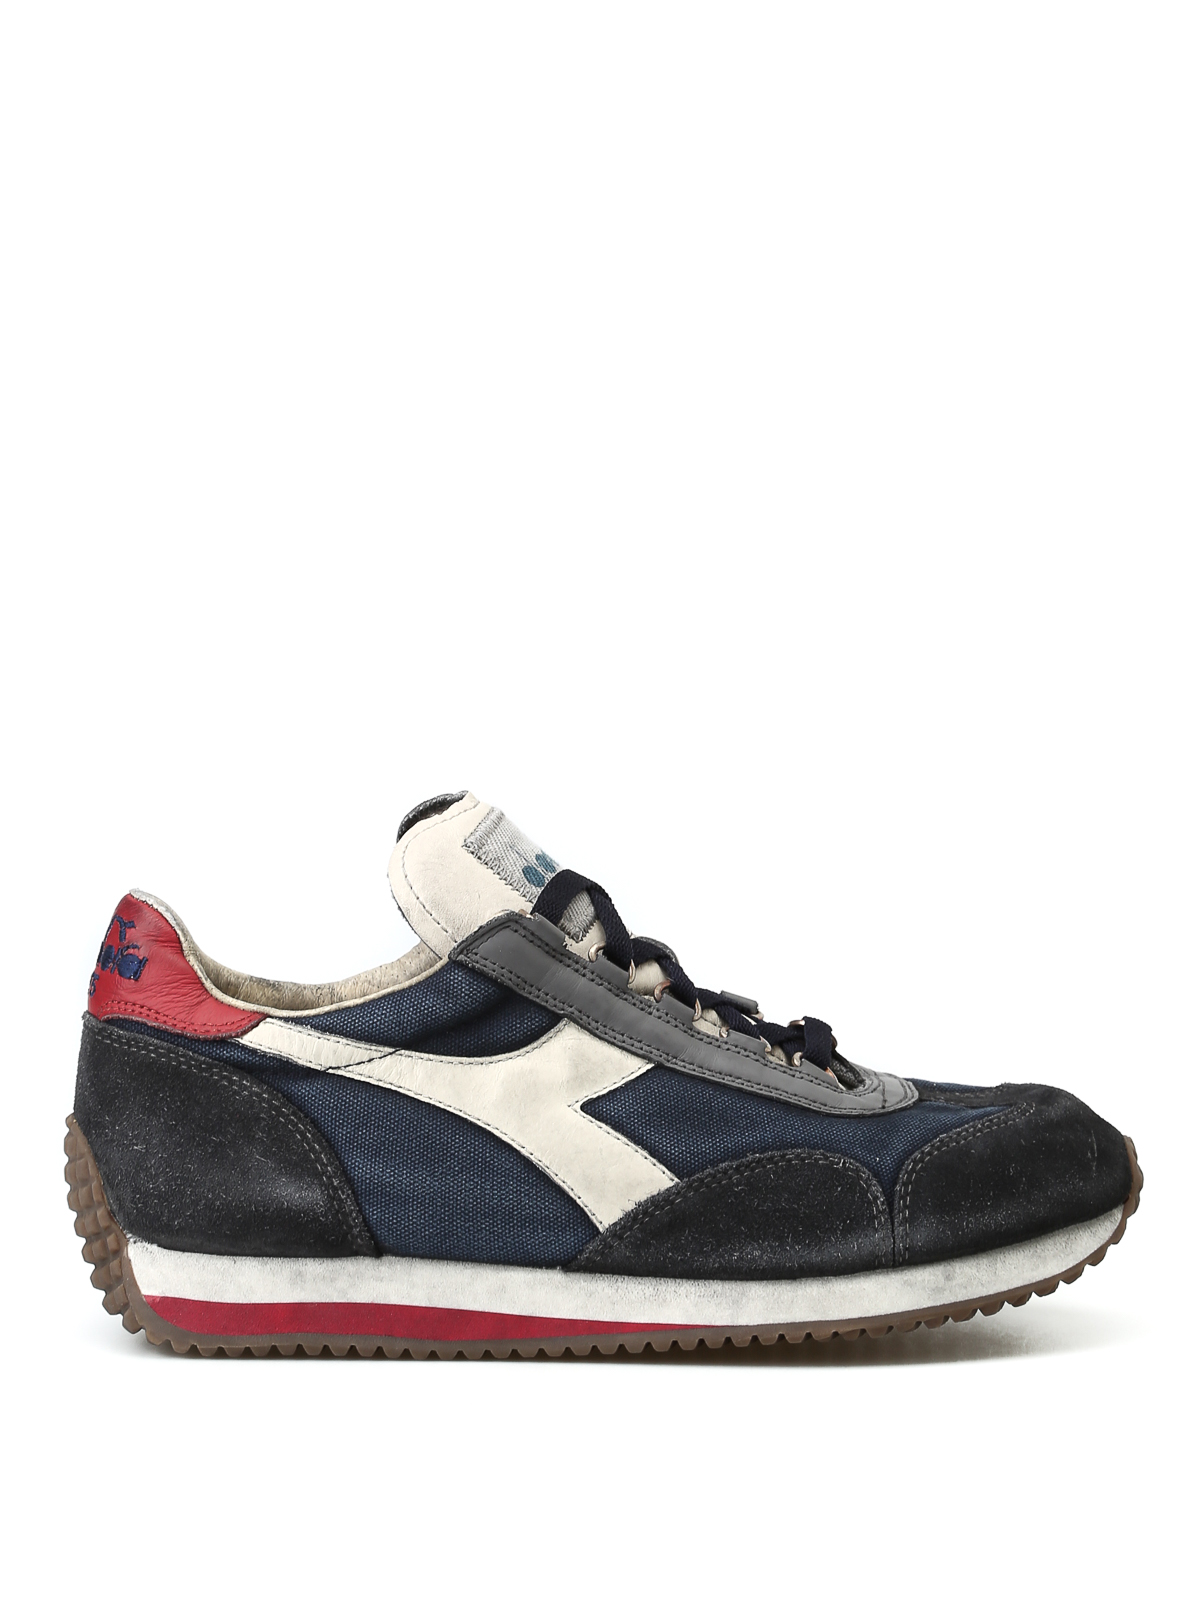 Diadora Heritage Equipe Sw Dirty Evo Sneakers Trainers c7665